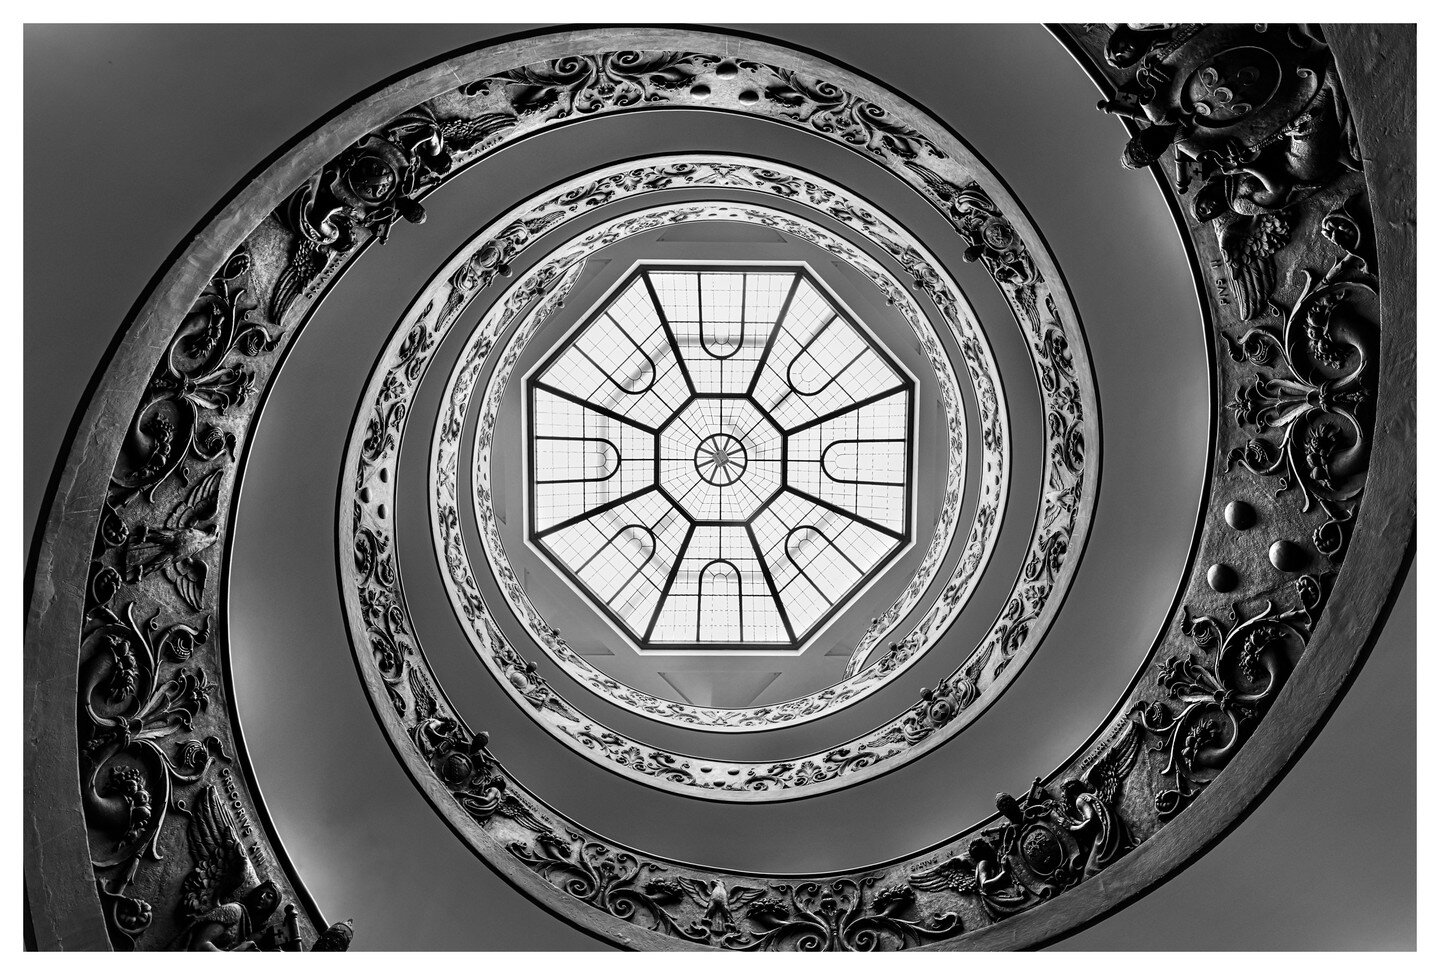 The Spiral - Vatican Museum, Rome, Italy.
#staircase #vatican #vaticanmuseum #bnw #bnwphotography #bestofbnw #intothelight #nikon #nikond850 #fineartphotography #fineart #fineartblackandwhite #italy